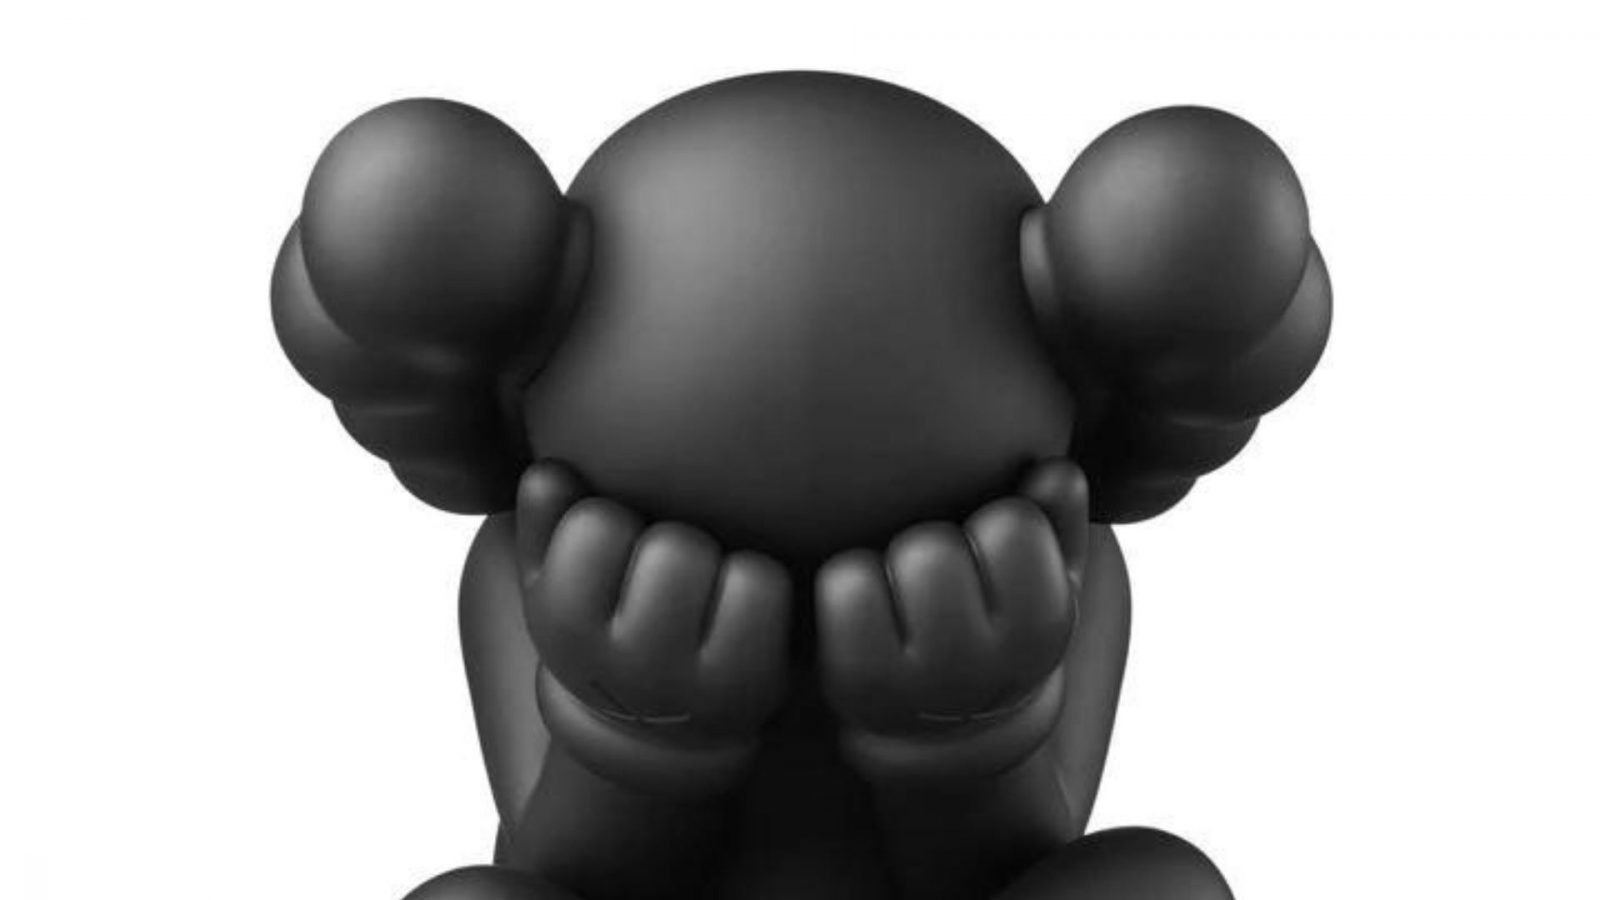 10 Contemporary Artists Like KAWS And Where to Buy Their Artworks